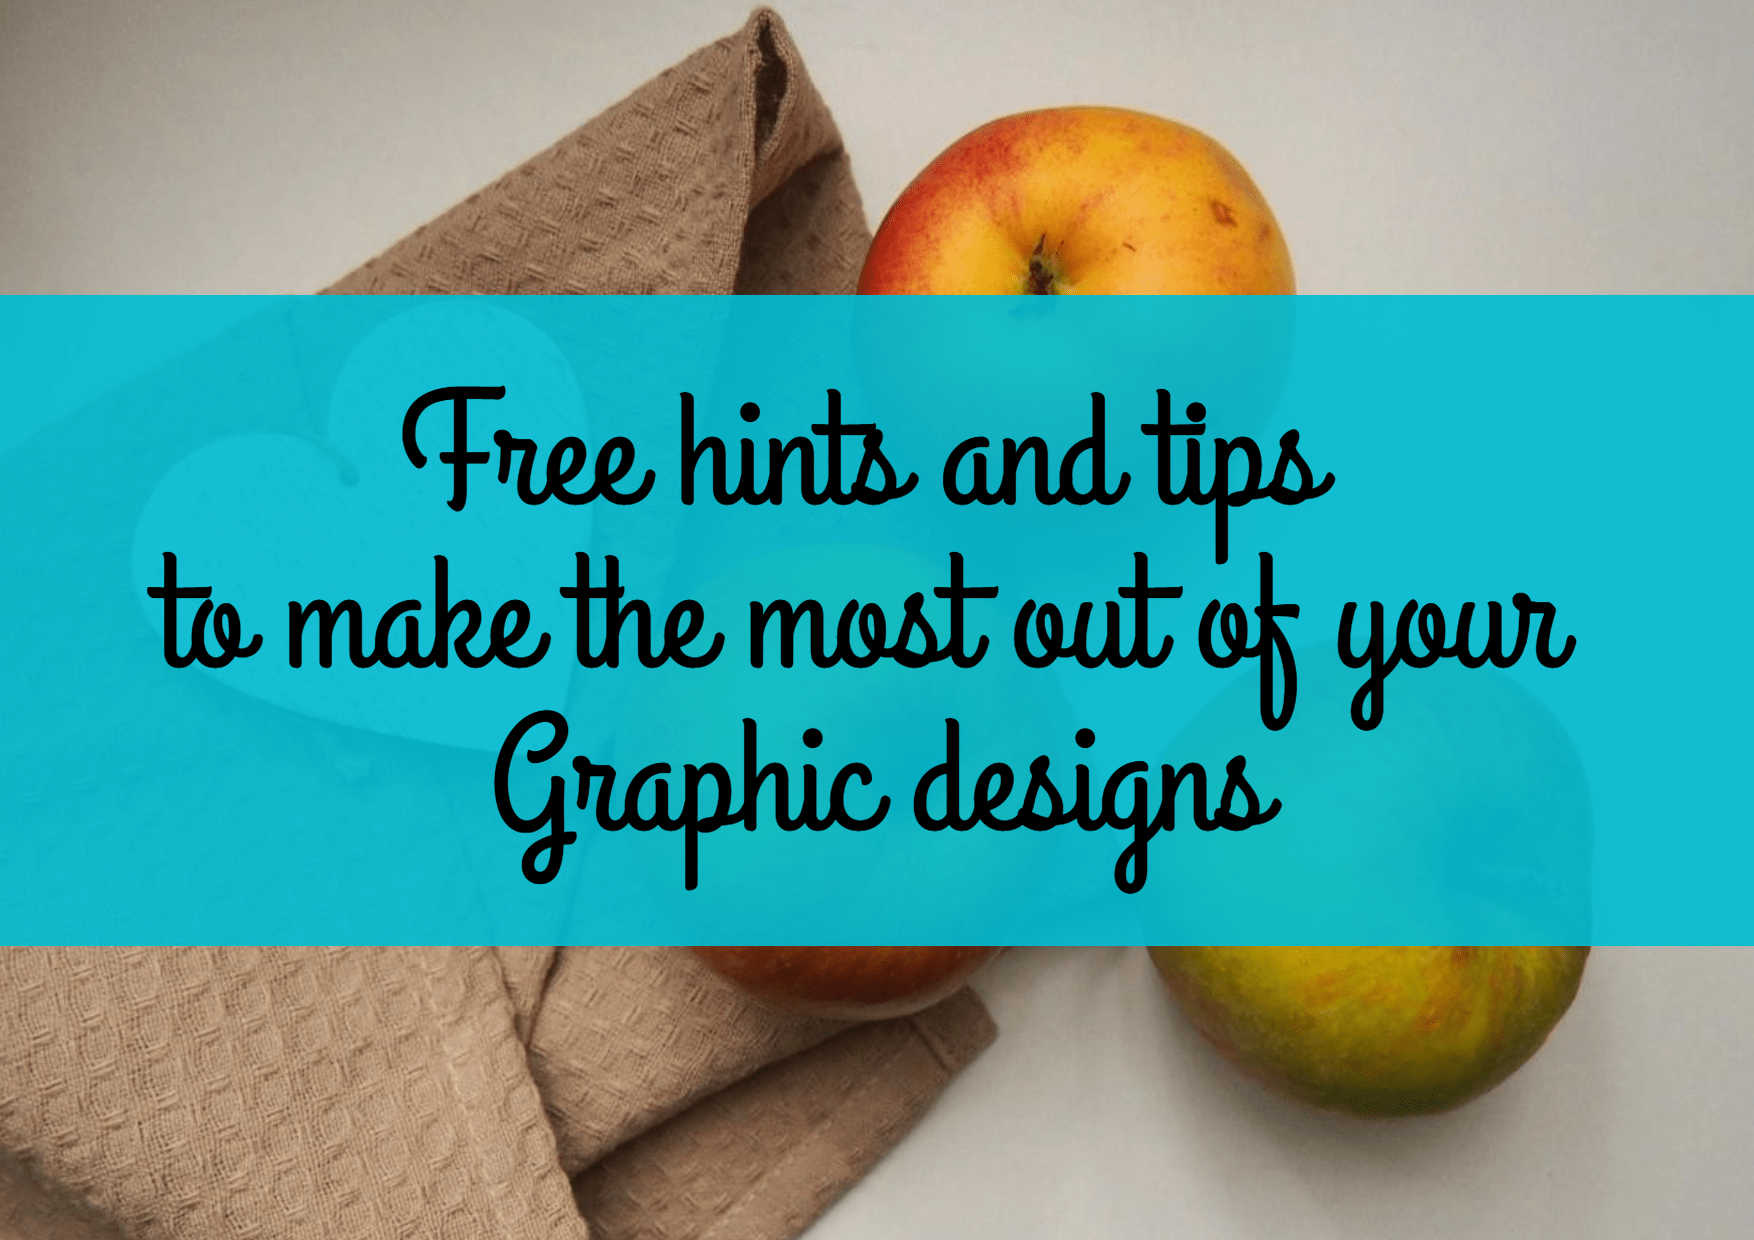 Free hints & tips to make the most Design  Template 